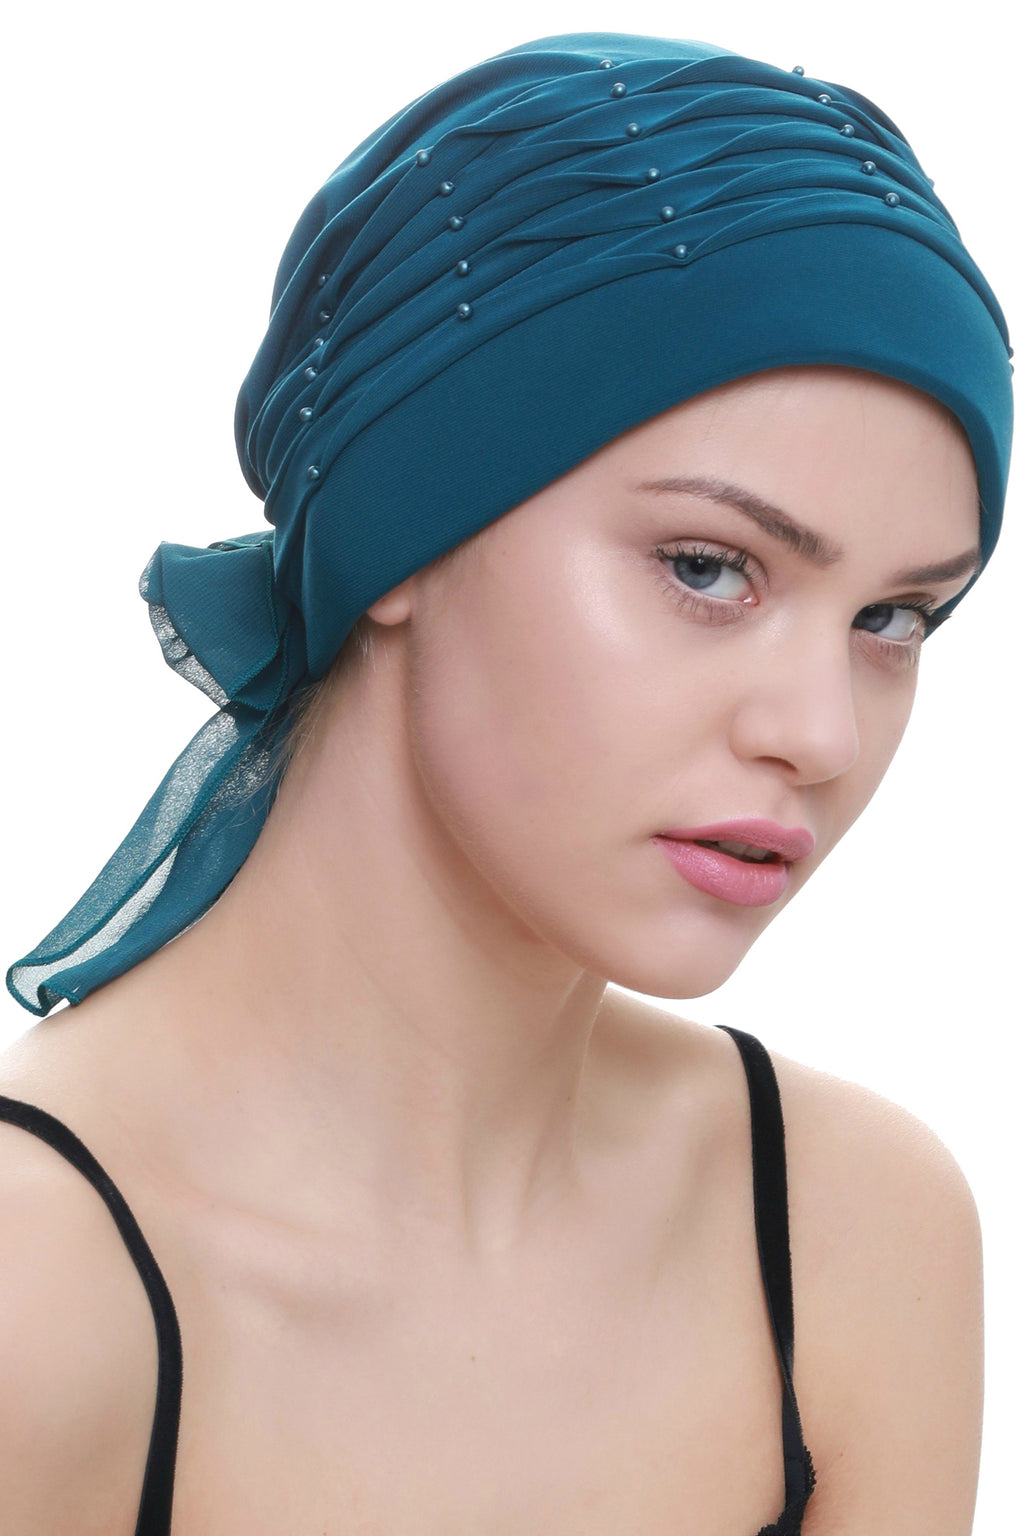 Deresina Twisted pleated cancer headwear teal